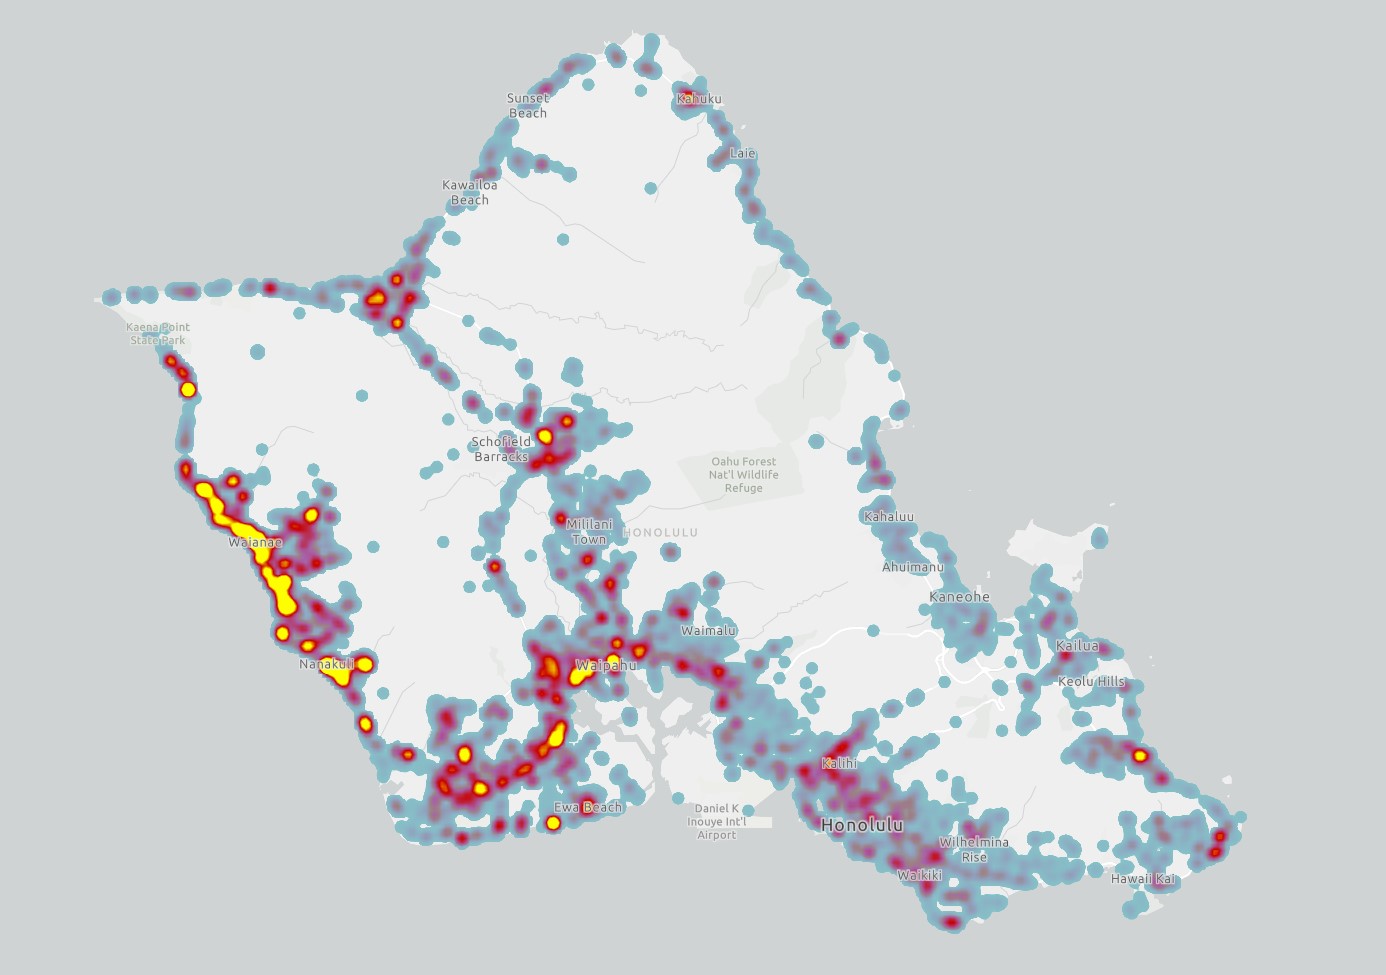 heat map of wildfire ignitions from 2000 to 2020 on Oahu